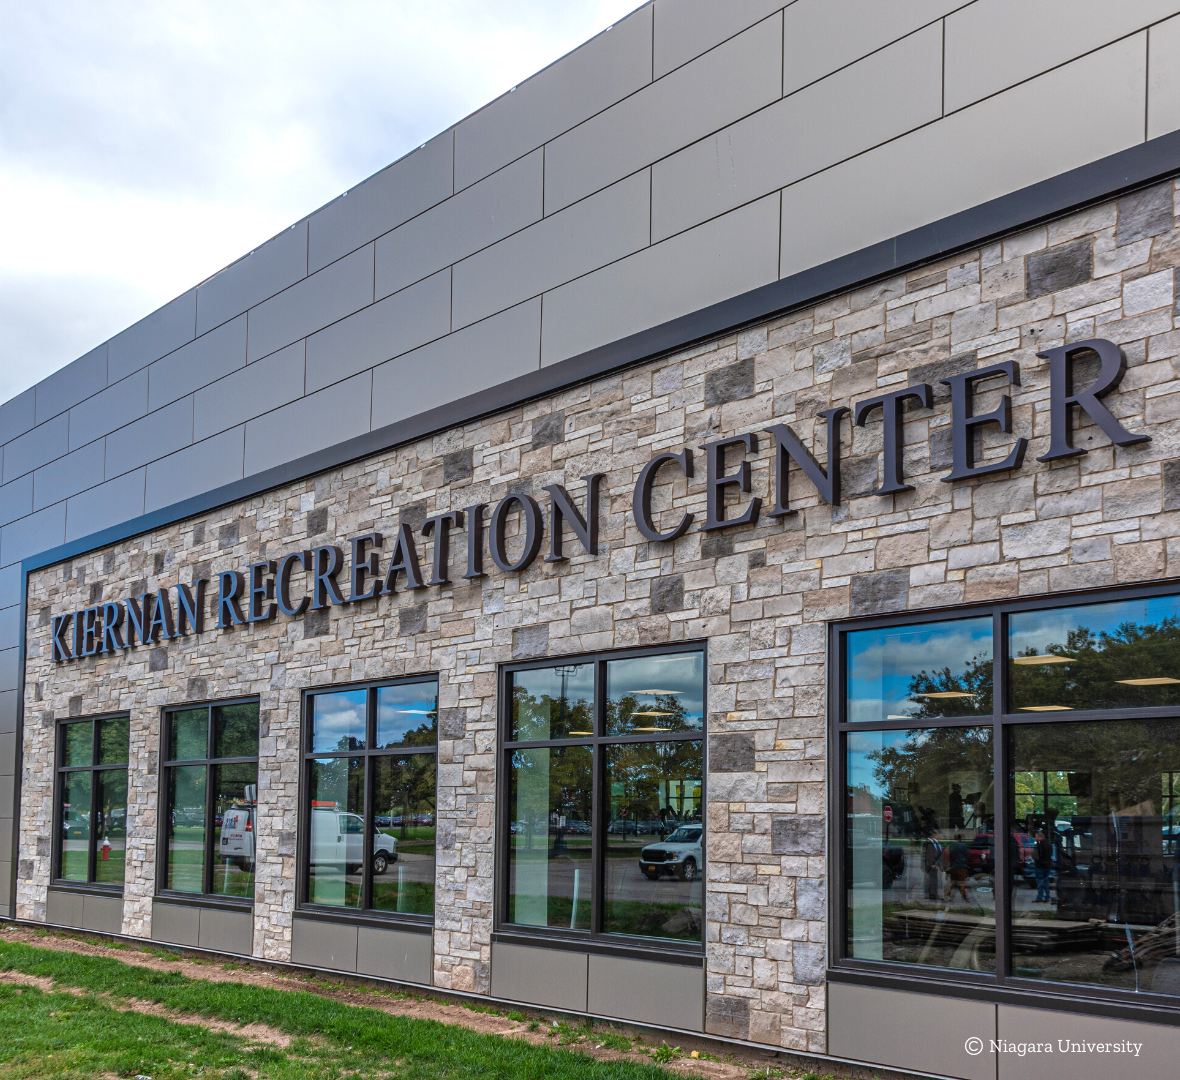 See what's happening at Glass Recreation Center this fall